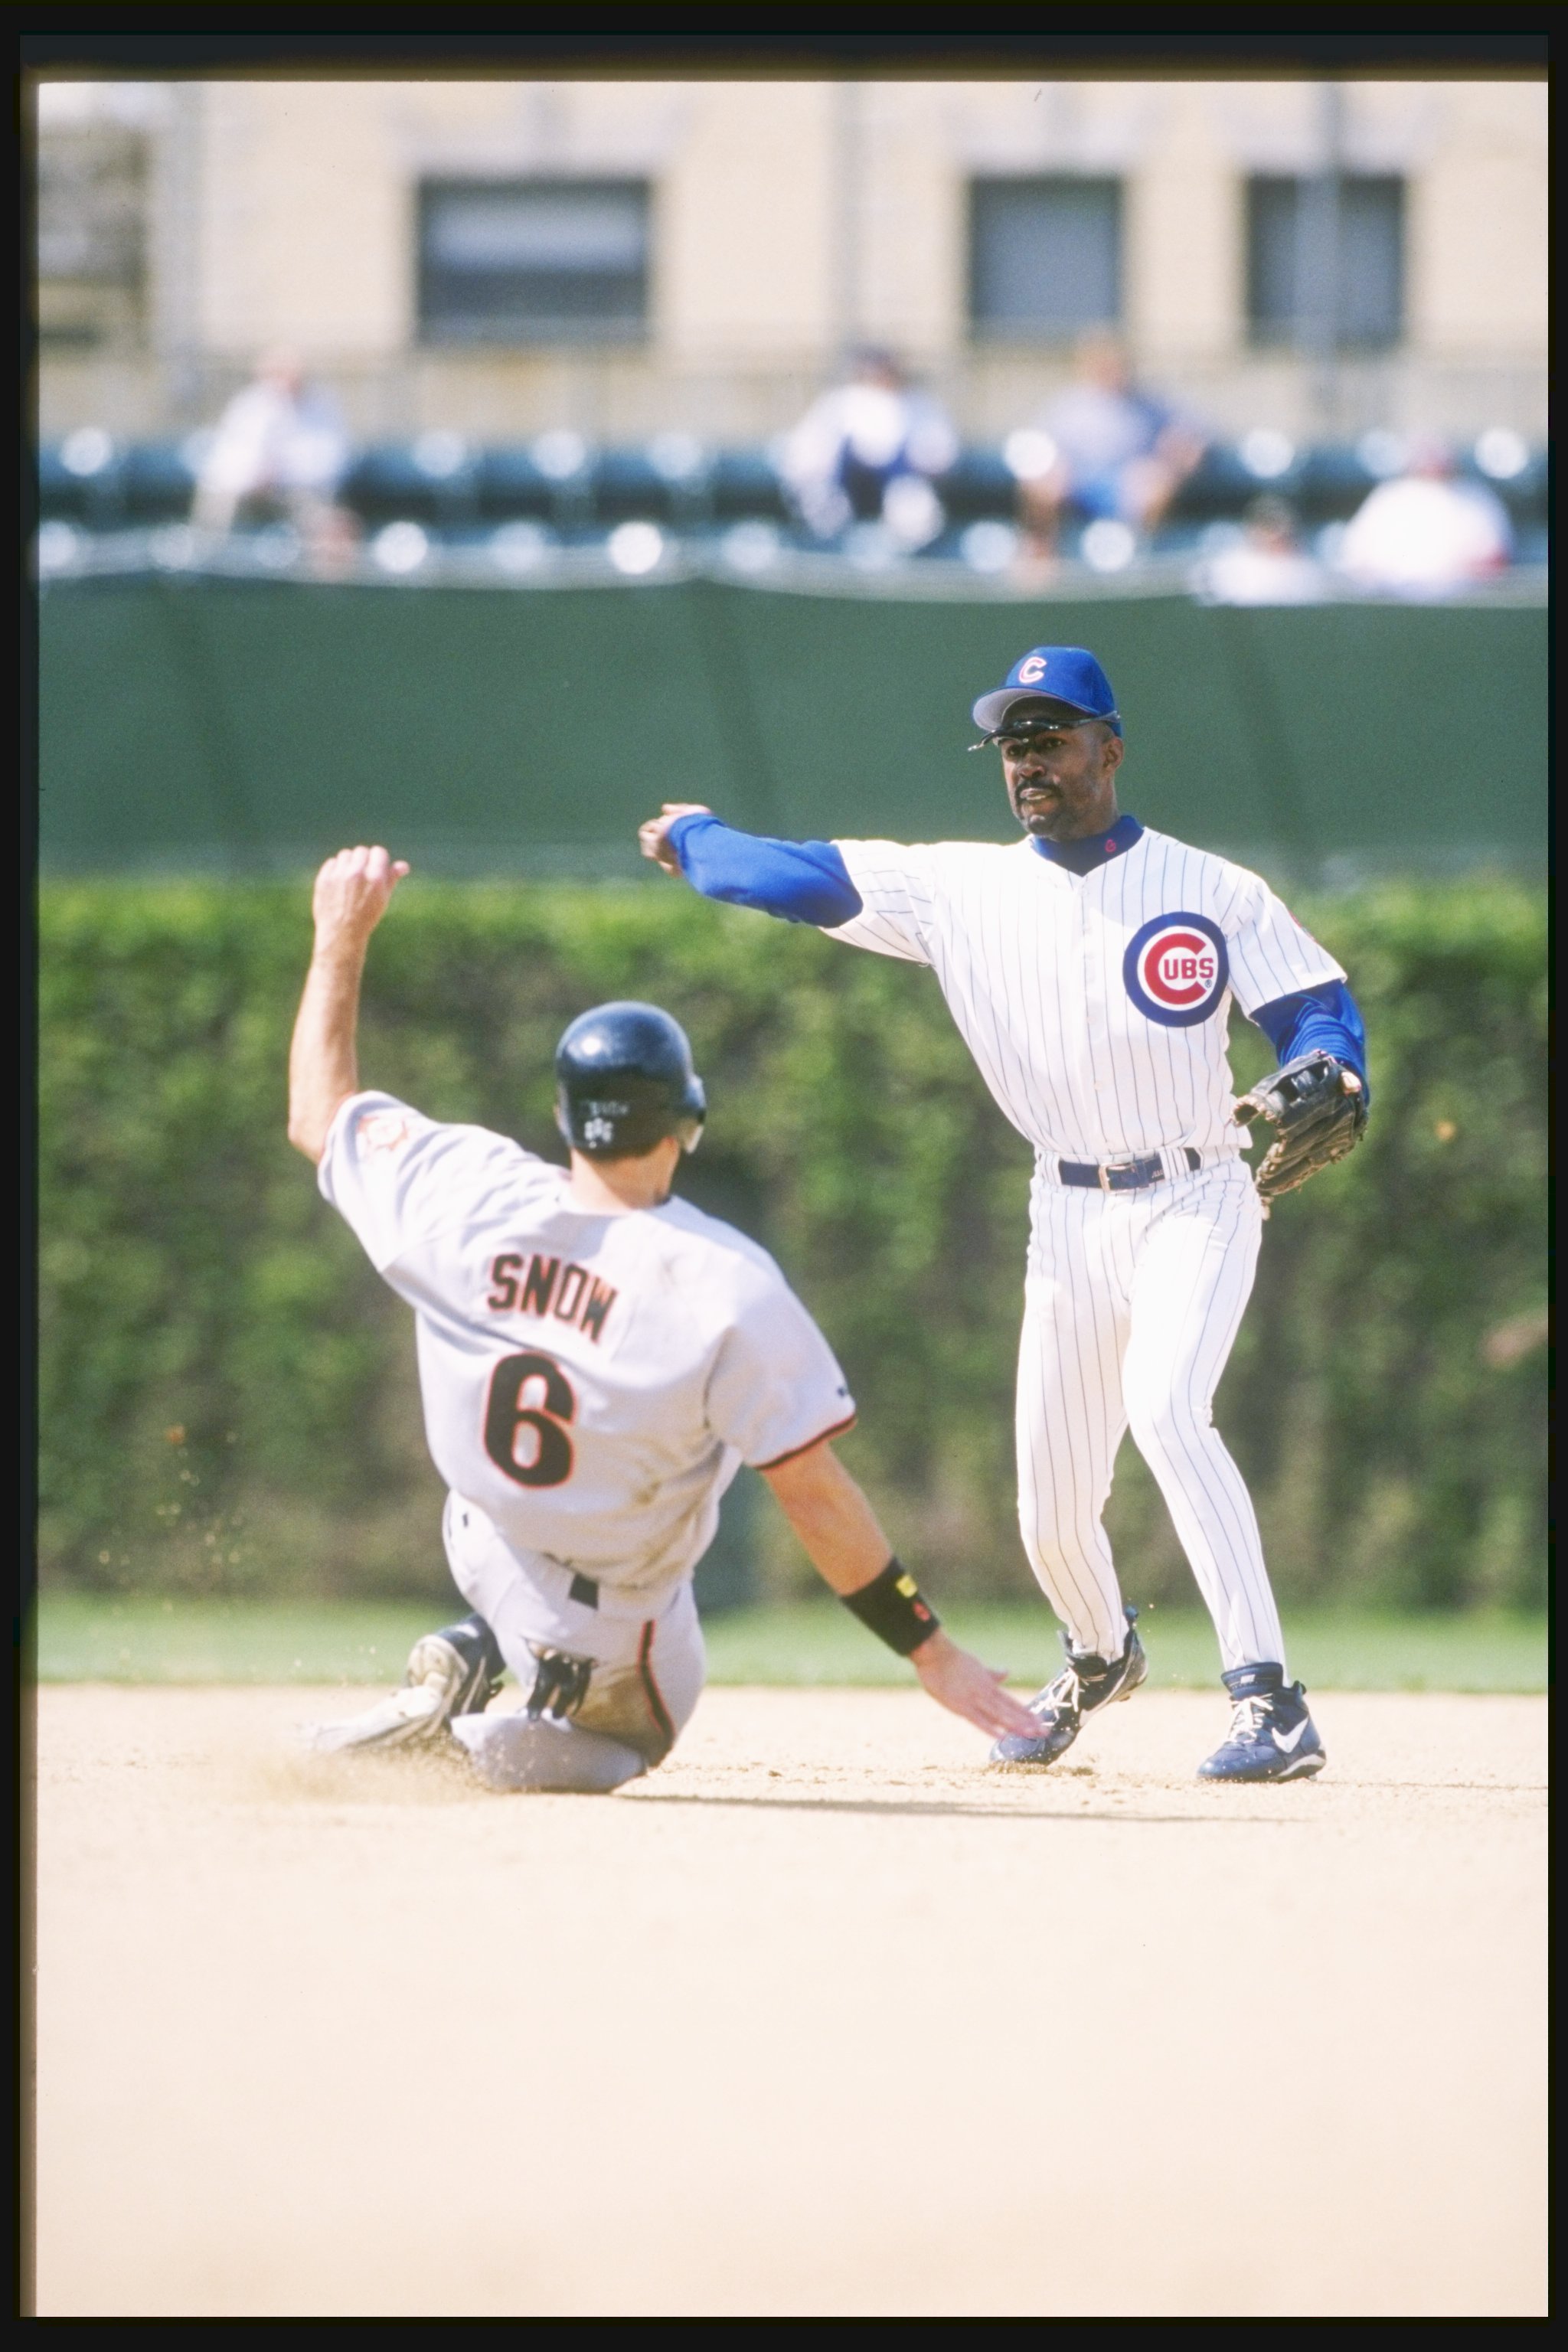 19 May 1997: Shortstop Shawn Dunston of the Chicago Cubs throws the ball as first baseman J.T. Snow of the San Francisco Giants slides at Wrigley Field in Chicago, Illinois. The Cubs won the game 15-4.